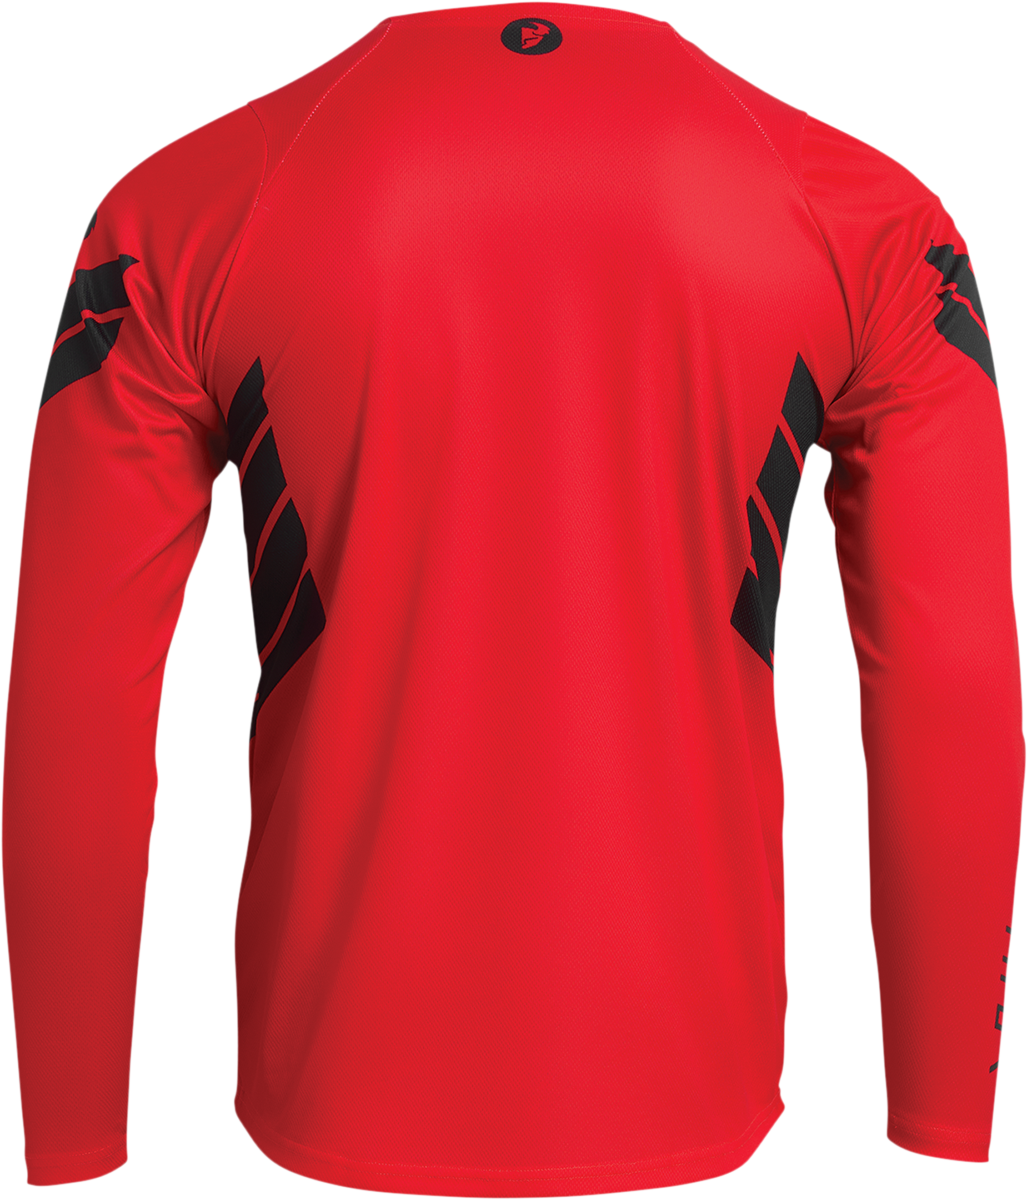 THOR Assist Sting Long-Sleeve Jersey - Red - 2XL 5020-0036